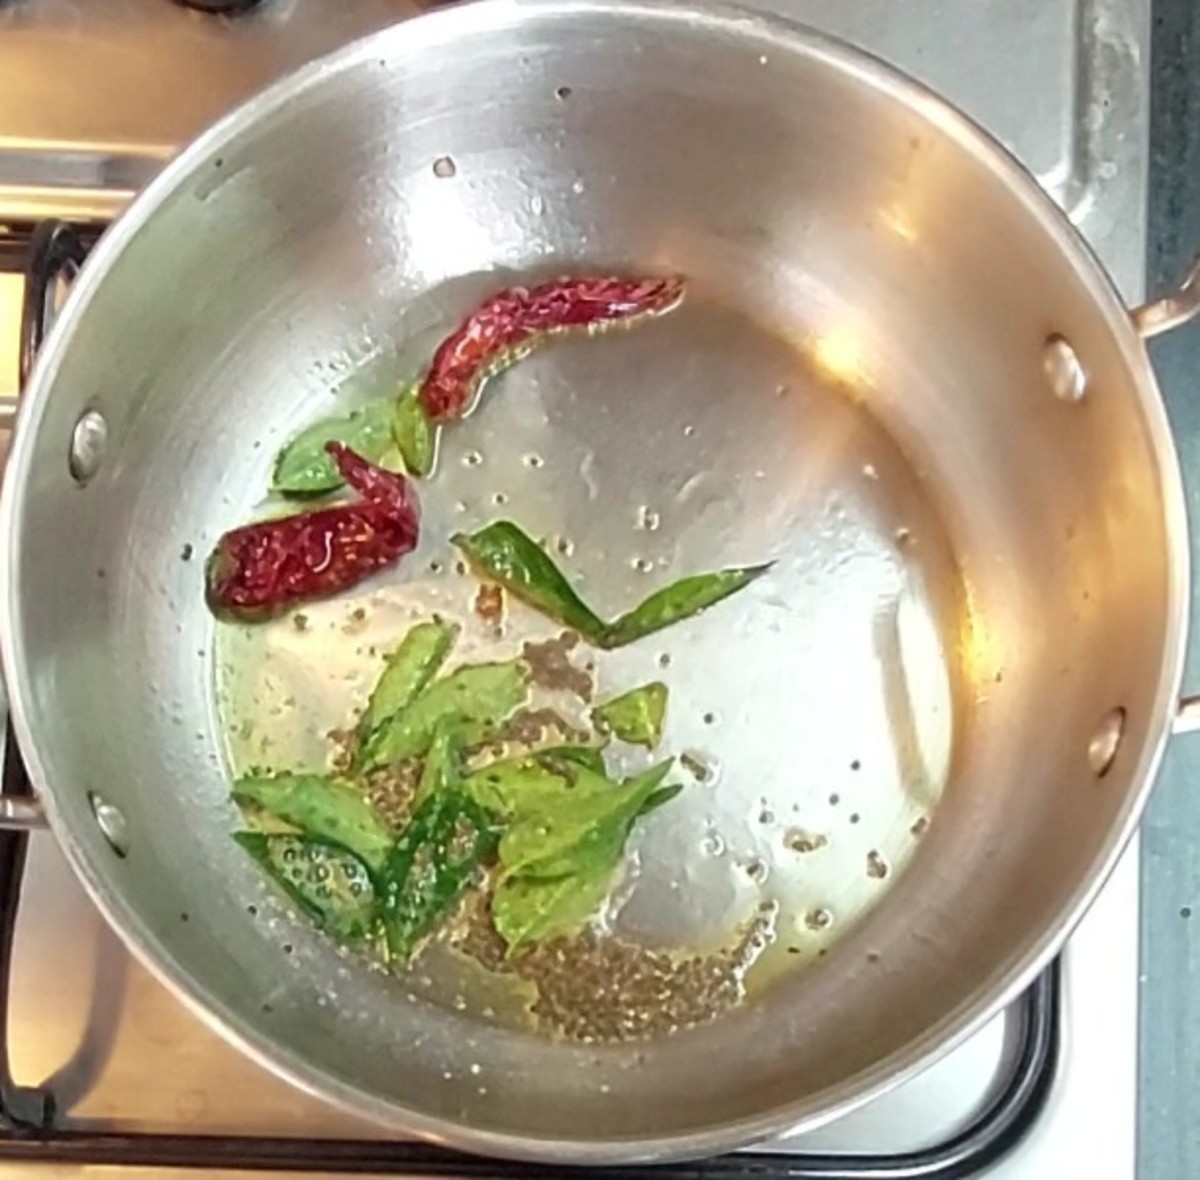 In a pan, heat 1 teaspoon ghee and splutter 1/2 teaspoon mustard seeds. Add 1-2 red chillies, a sprig of curry leaves and 1/4 teaspoon hing. Mix once and switch off the flame.